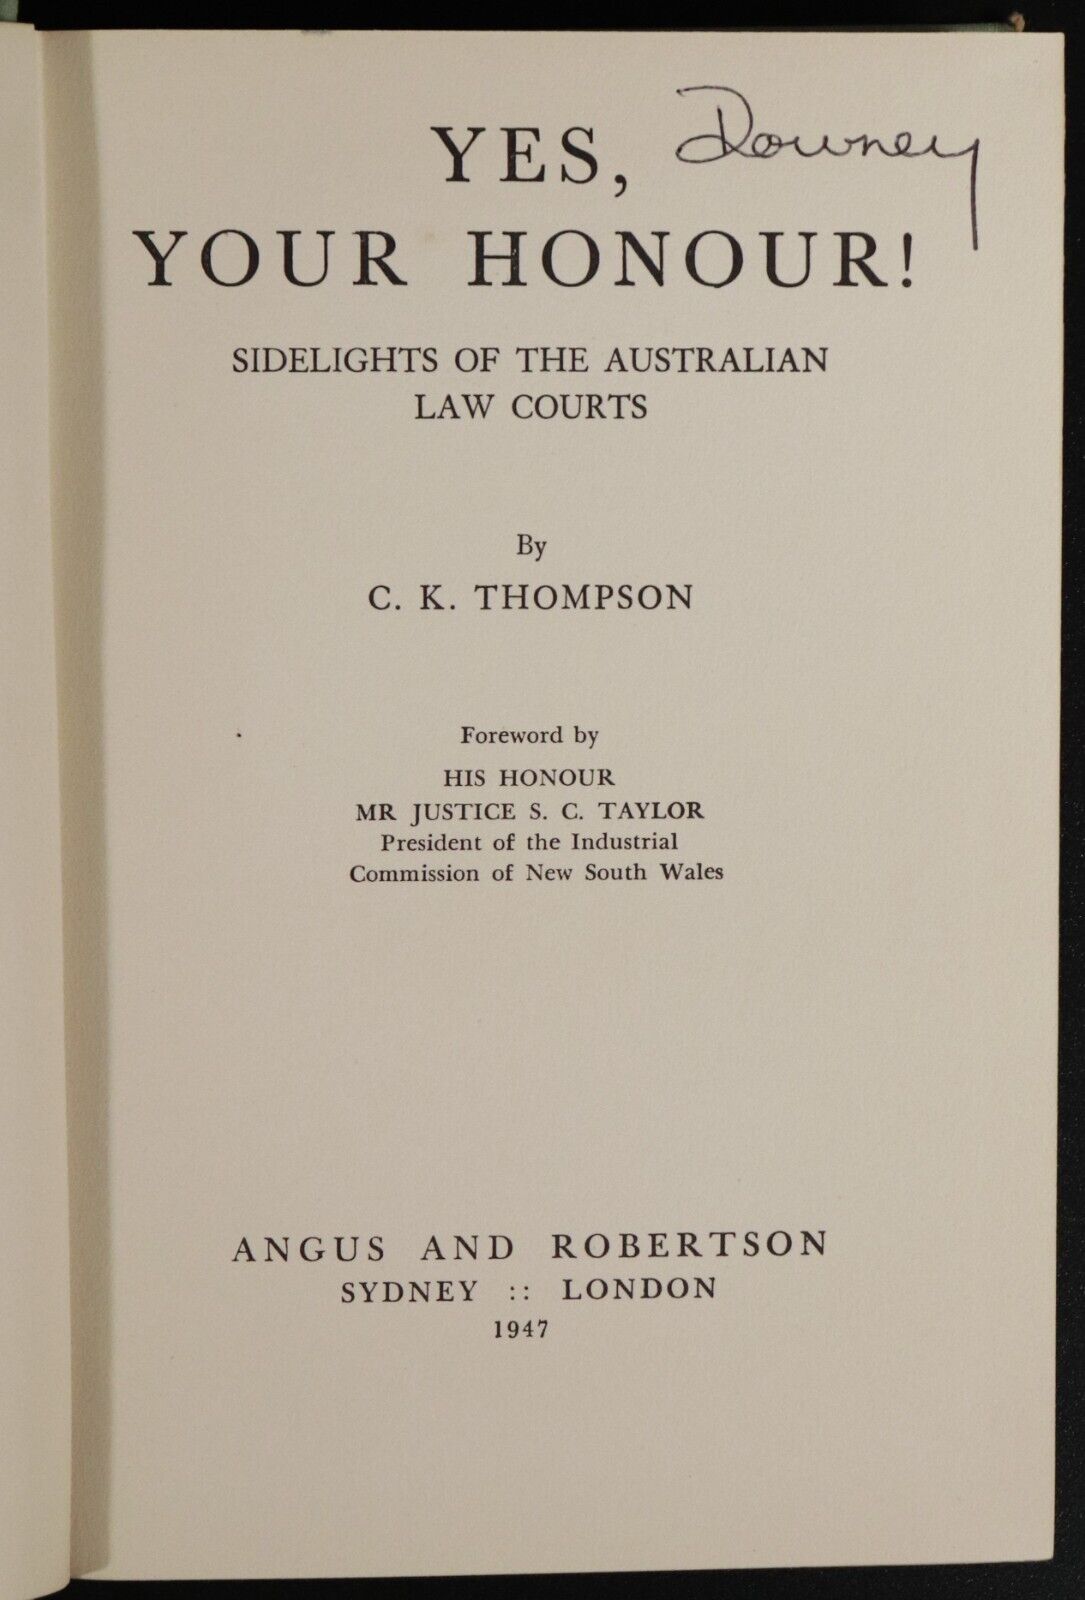 1947 Yes Your Honour! by C.K. Thompson 1st Edition Australian Legal History Book - 0